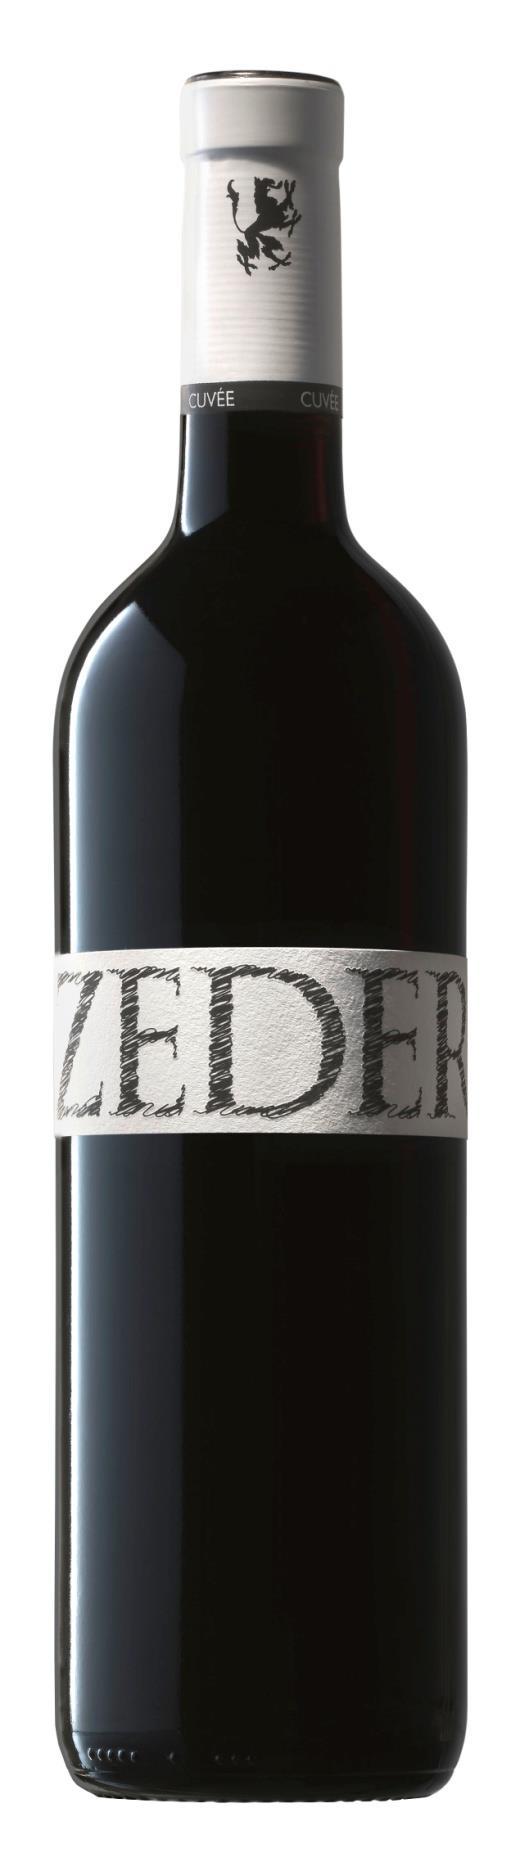 ZEDER Merlot, Cabernet, Lagrein 2015 First vintage 2003 270-320 m South facing Slope 0 15 % Pruning system Guyot, Pergola Vines/hectare 3300 6000 Yield/hectare 50 hl End of September middle of